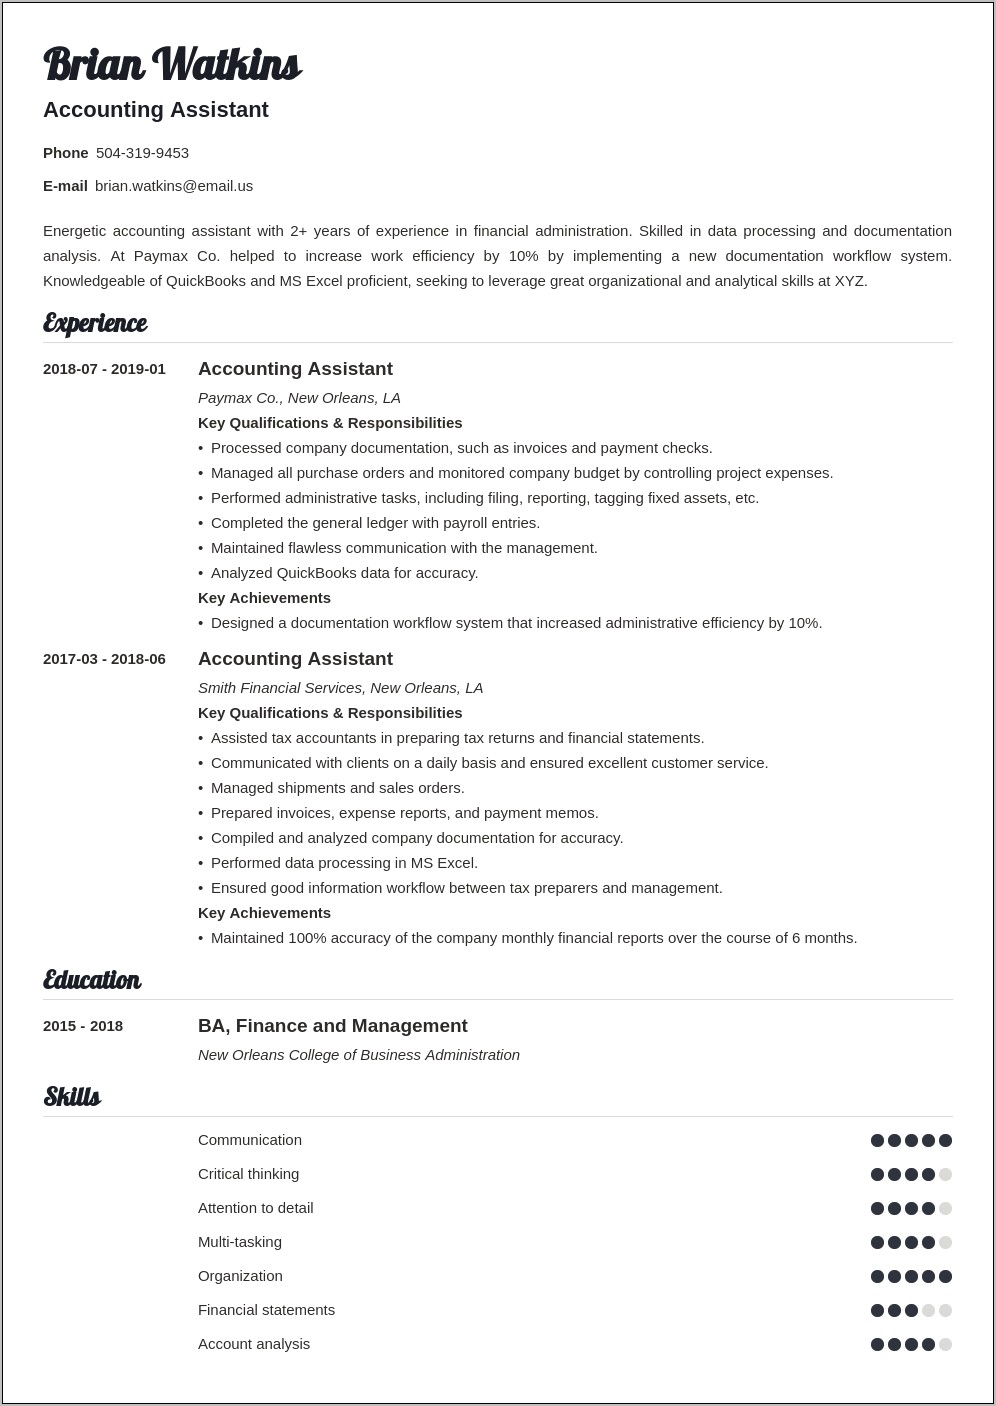 Resume Objective Summary Accounting Assistant